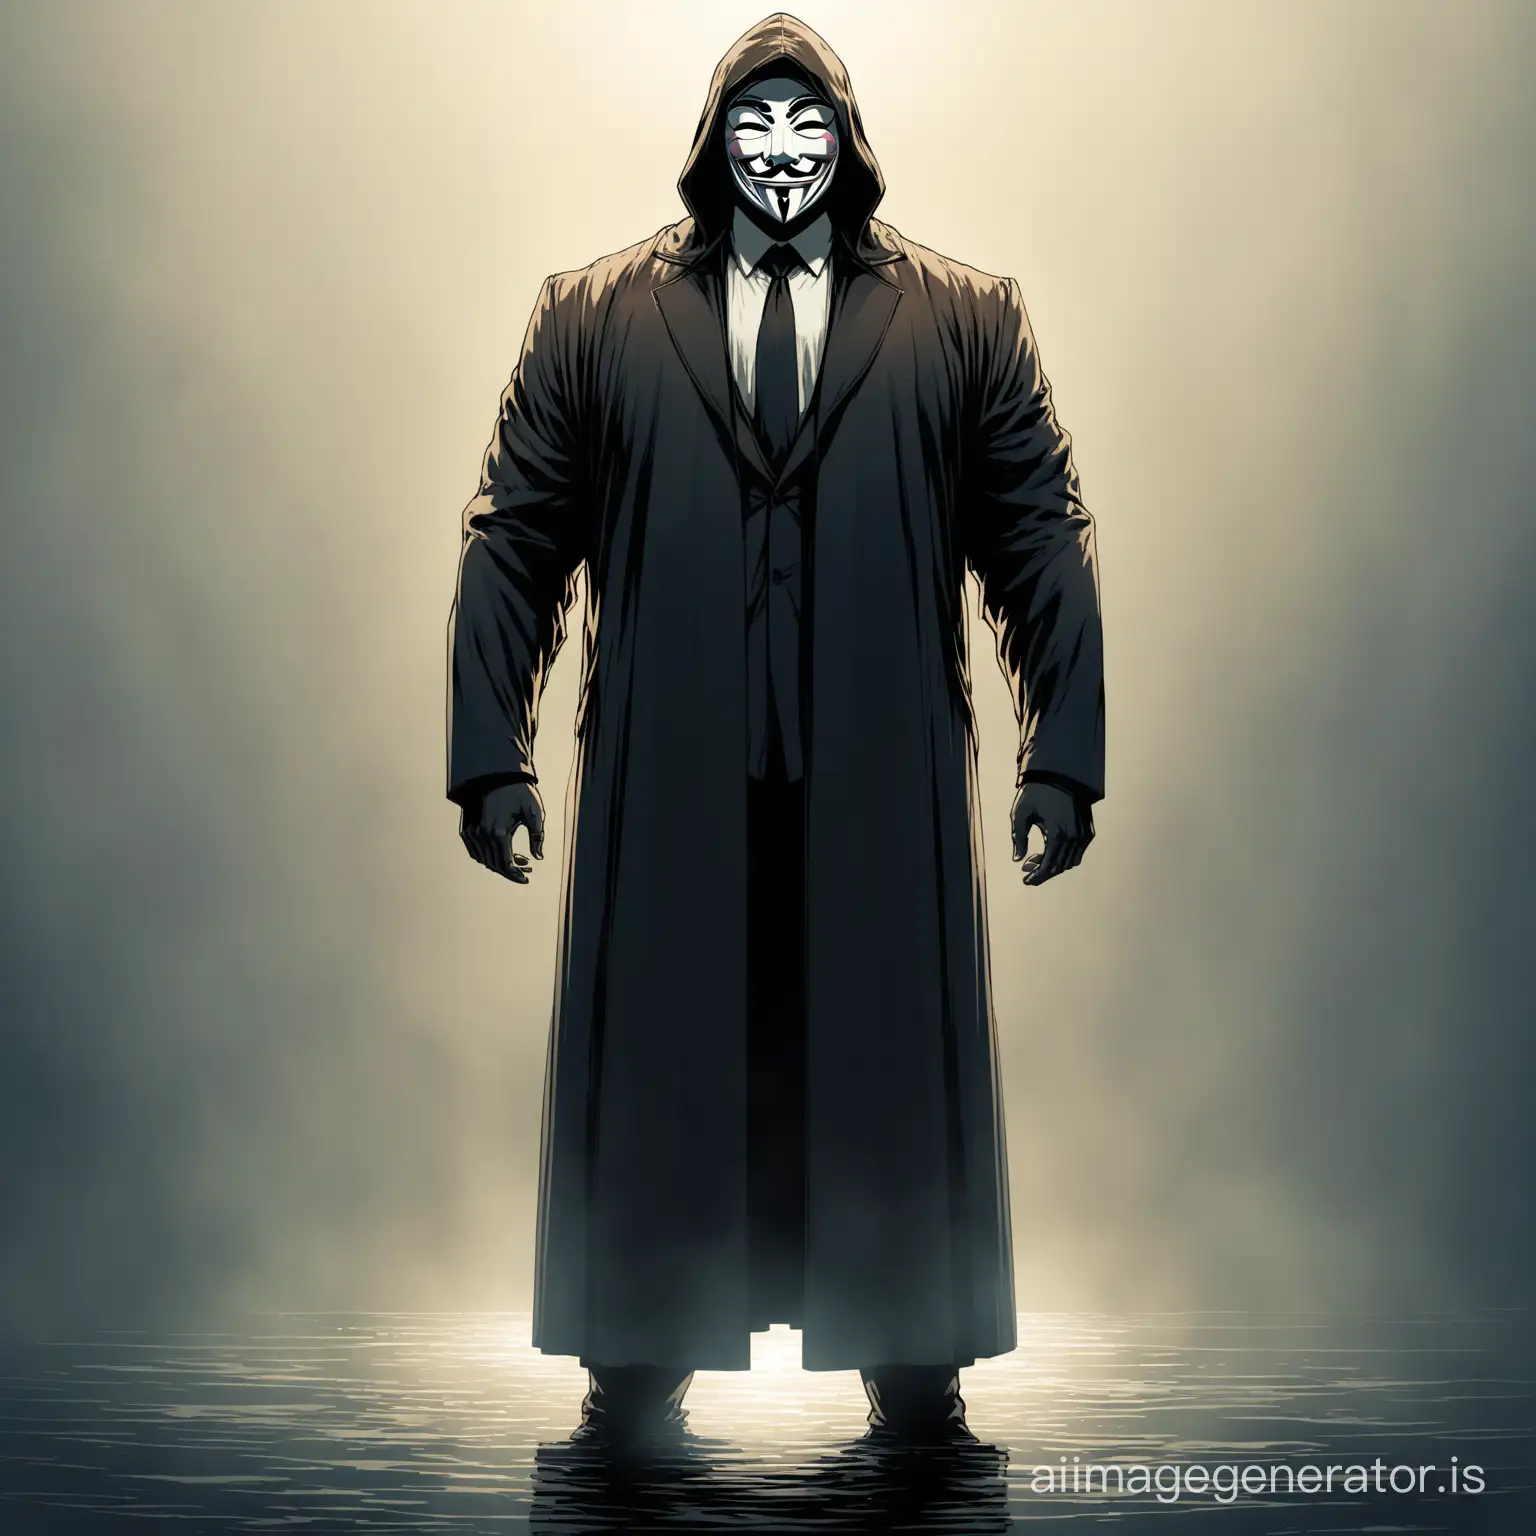 Enigmatic-Anonymous-Figure-Imposing-Presence-and-Mysterious-Mask